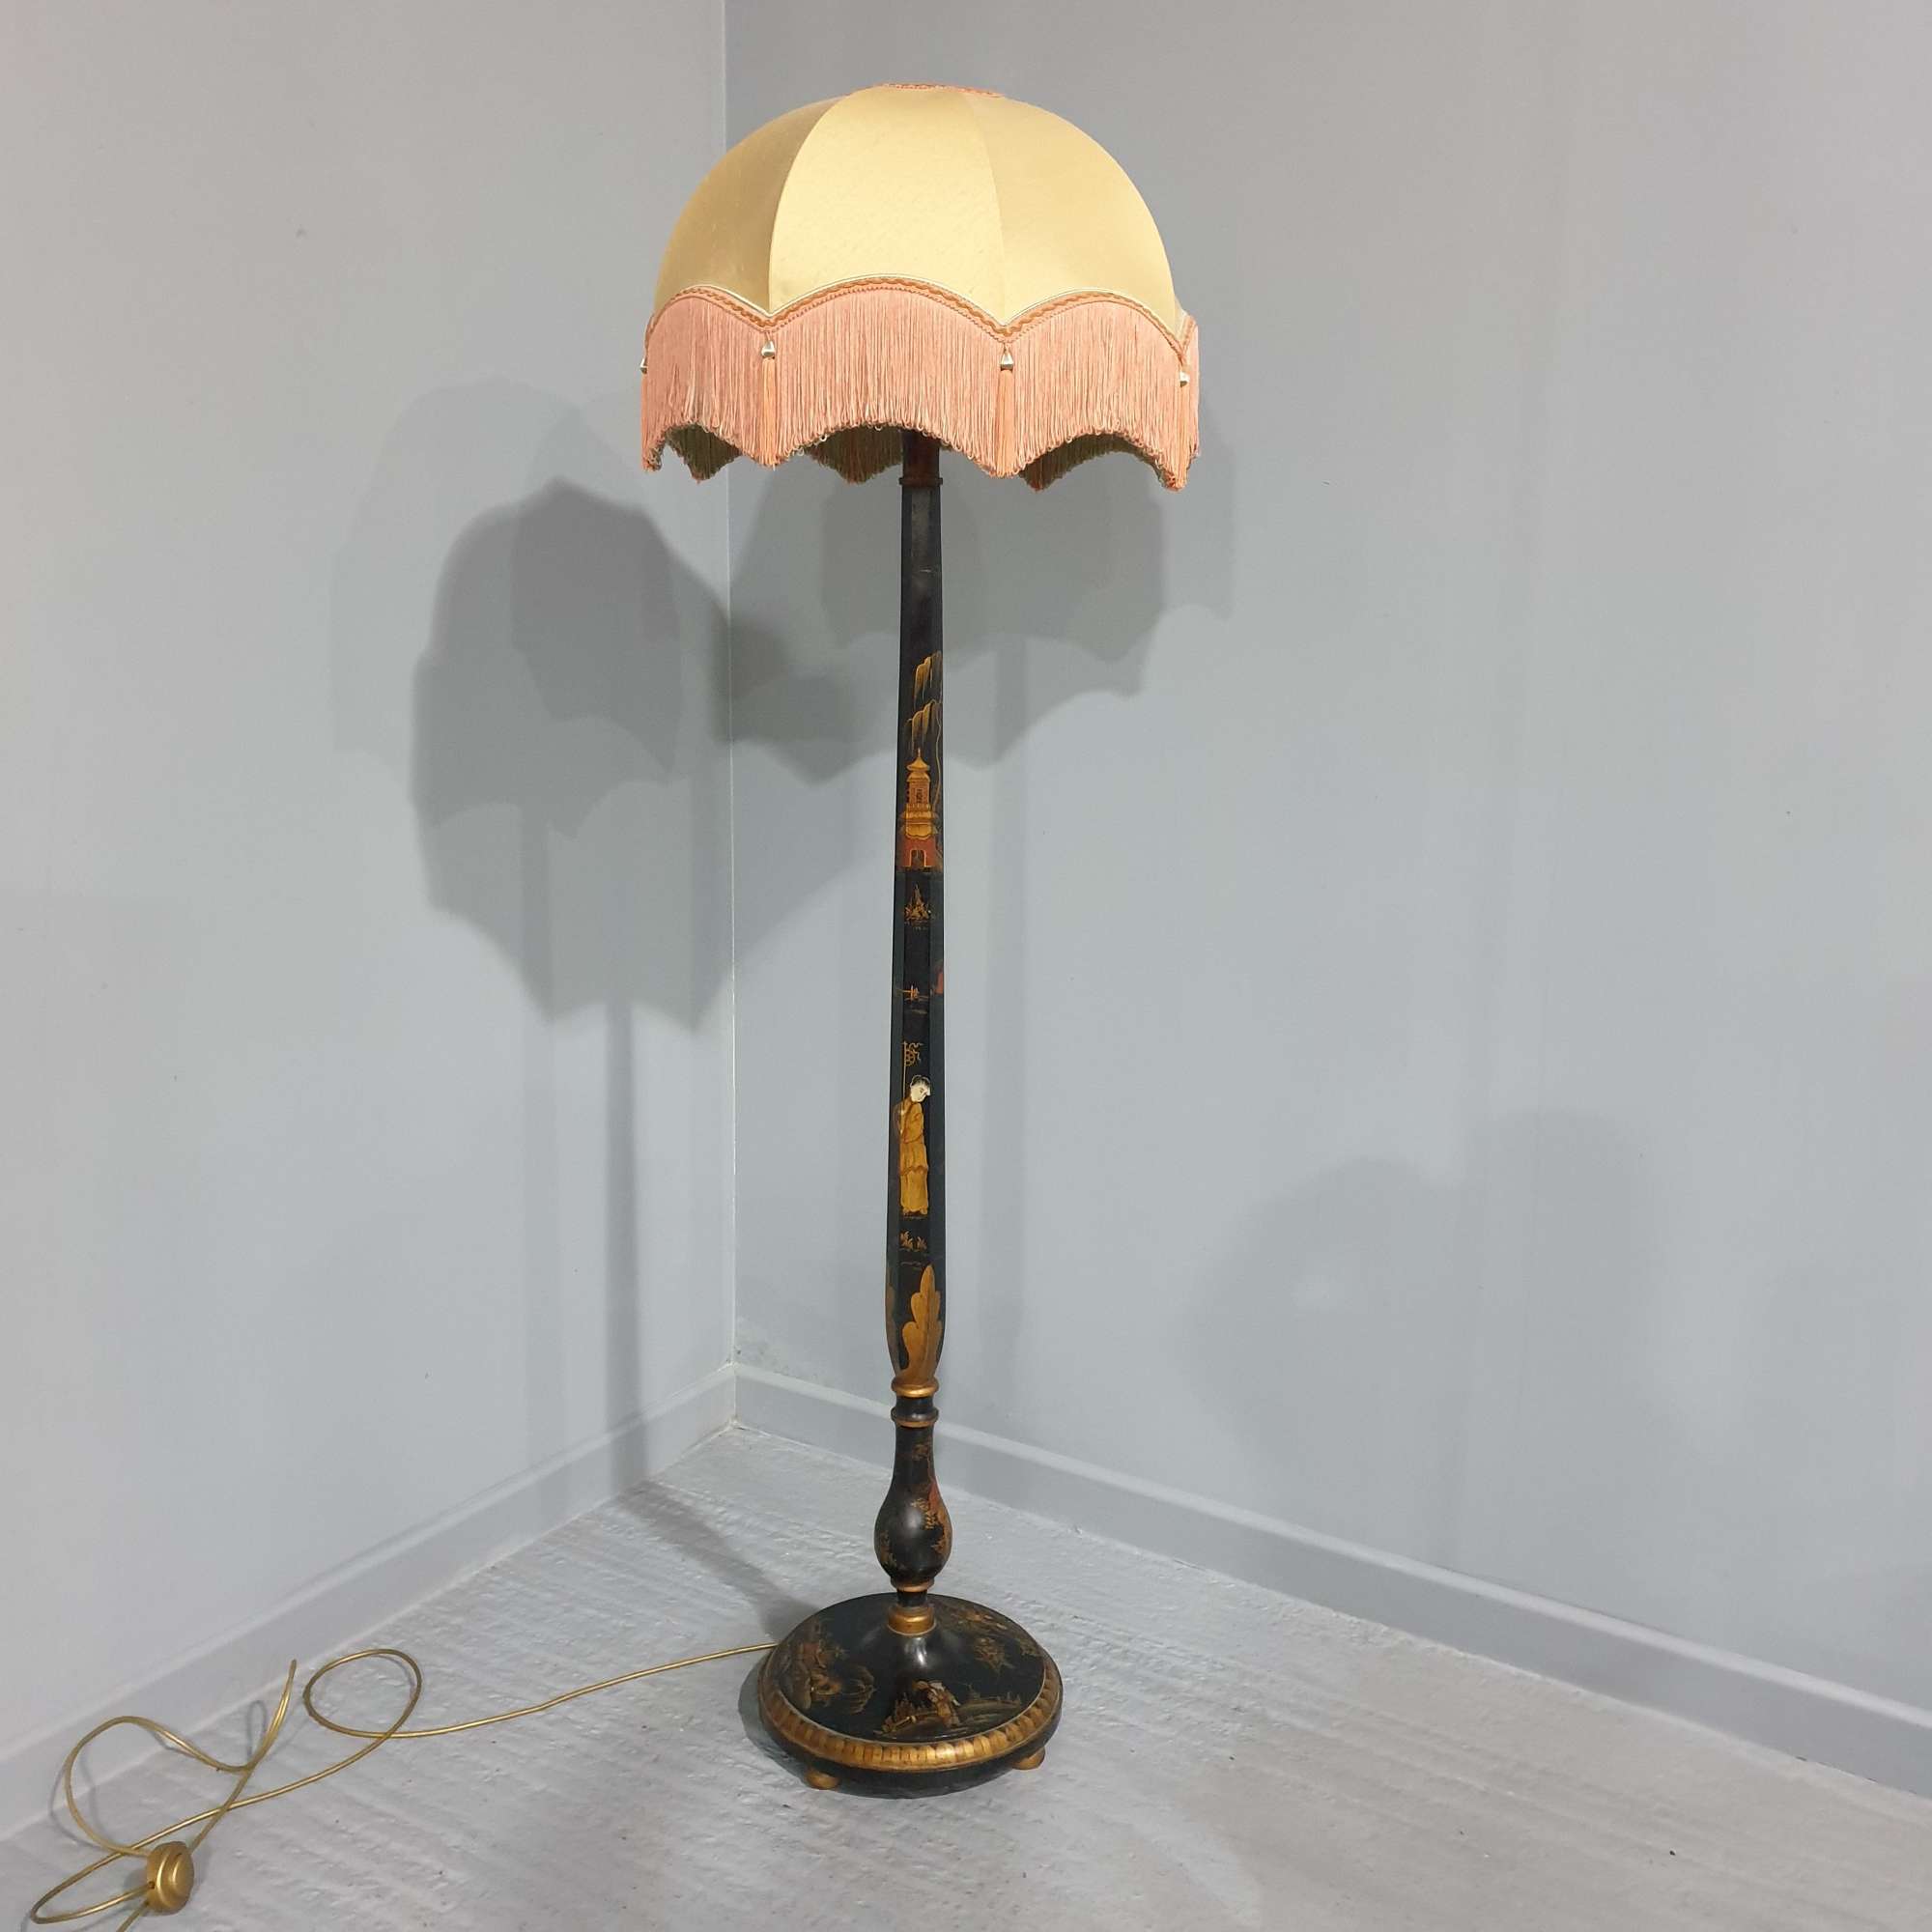 Superb Quality Chinoiserie Standard Lamp